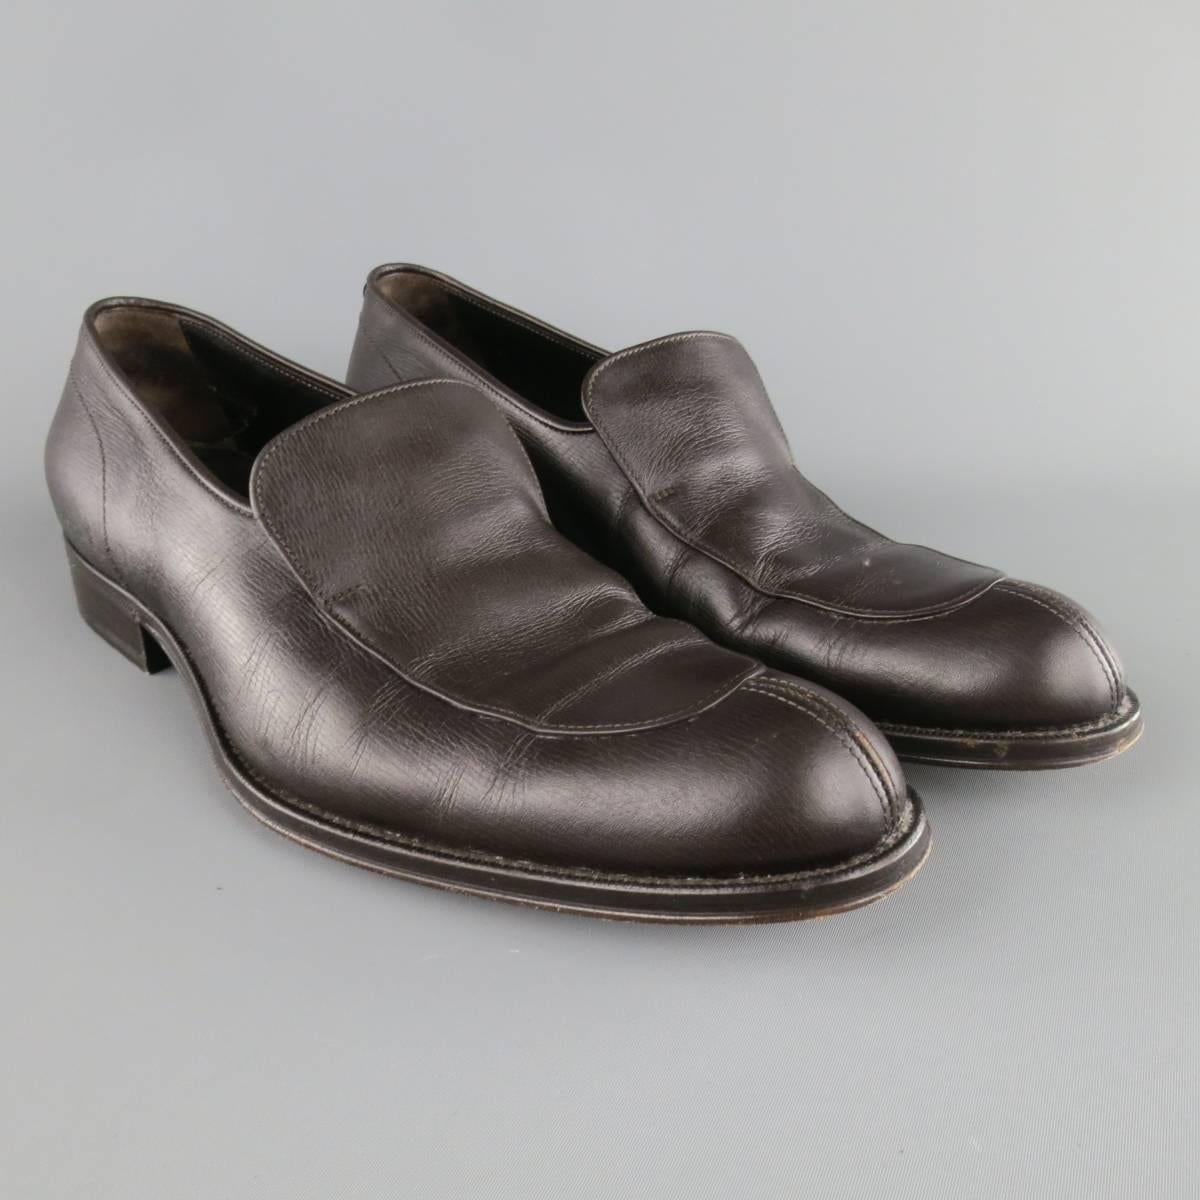 GIORGIO ARMANI loafers in a deep brown textured leather featuring a pointed spit apron toe. Made in Italy.
 
Good Pre-Owned Condition.
Marked: 42.5
 
Outsole: 12.25 x 4.25 in.
